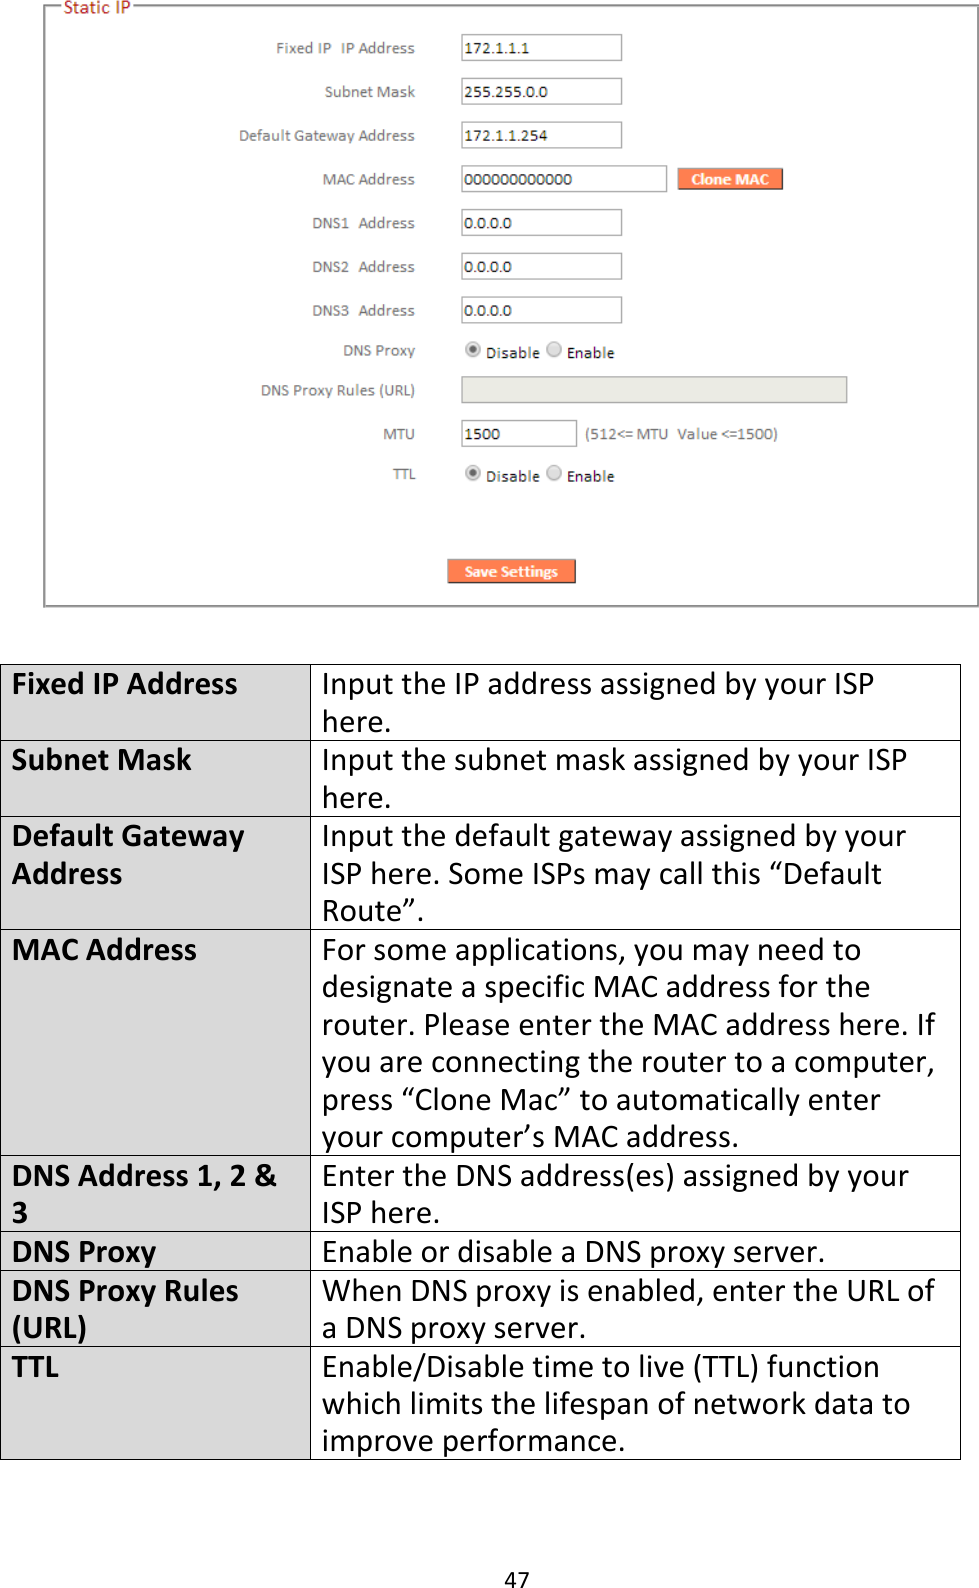 47   Fixed IP Address Input the IP address assigned by your ISP here. Subnet Mask Input the subnet mask assigned by your ISP here. Default Gateway Address Input the default gateway assigned by your ISP here. Some ISPs may call this “Default Route”. MAC Address For some applications, you may need to designate a specific MAC address for the router. Please enter the MAC address here. If you are connecting the router to a computer, press “Clone Mac” to automatically enter your computer’s MAC address. DNS Address 1, 2 &amp; 3 Enter the DNS address(es) assigned by your ISP here. DNS Proxy Enable or disable a DNS proxy server. DNS Proxy Rules (URL) When DNS proxy is enabled, enter the URL of a DNS proxy server. TTL Enable/Disable time to live (TTL) function which limits the lifespan of network data to improve performance.  